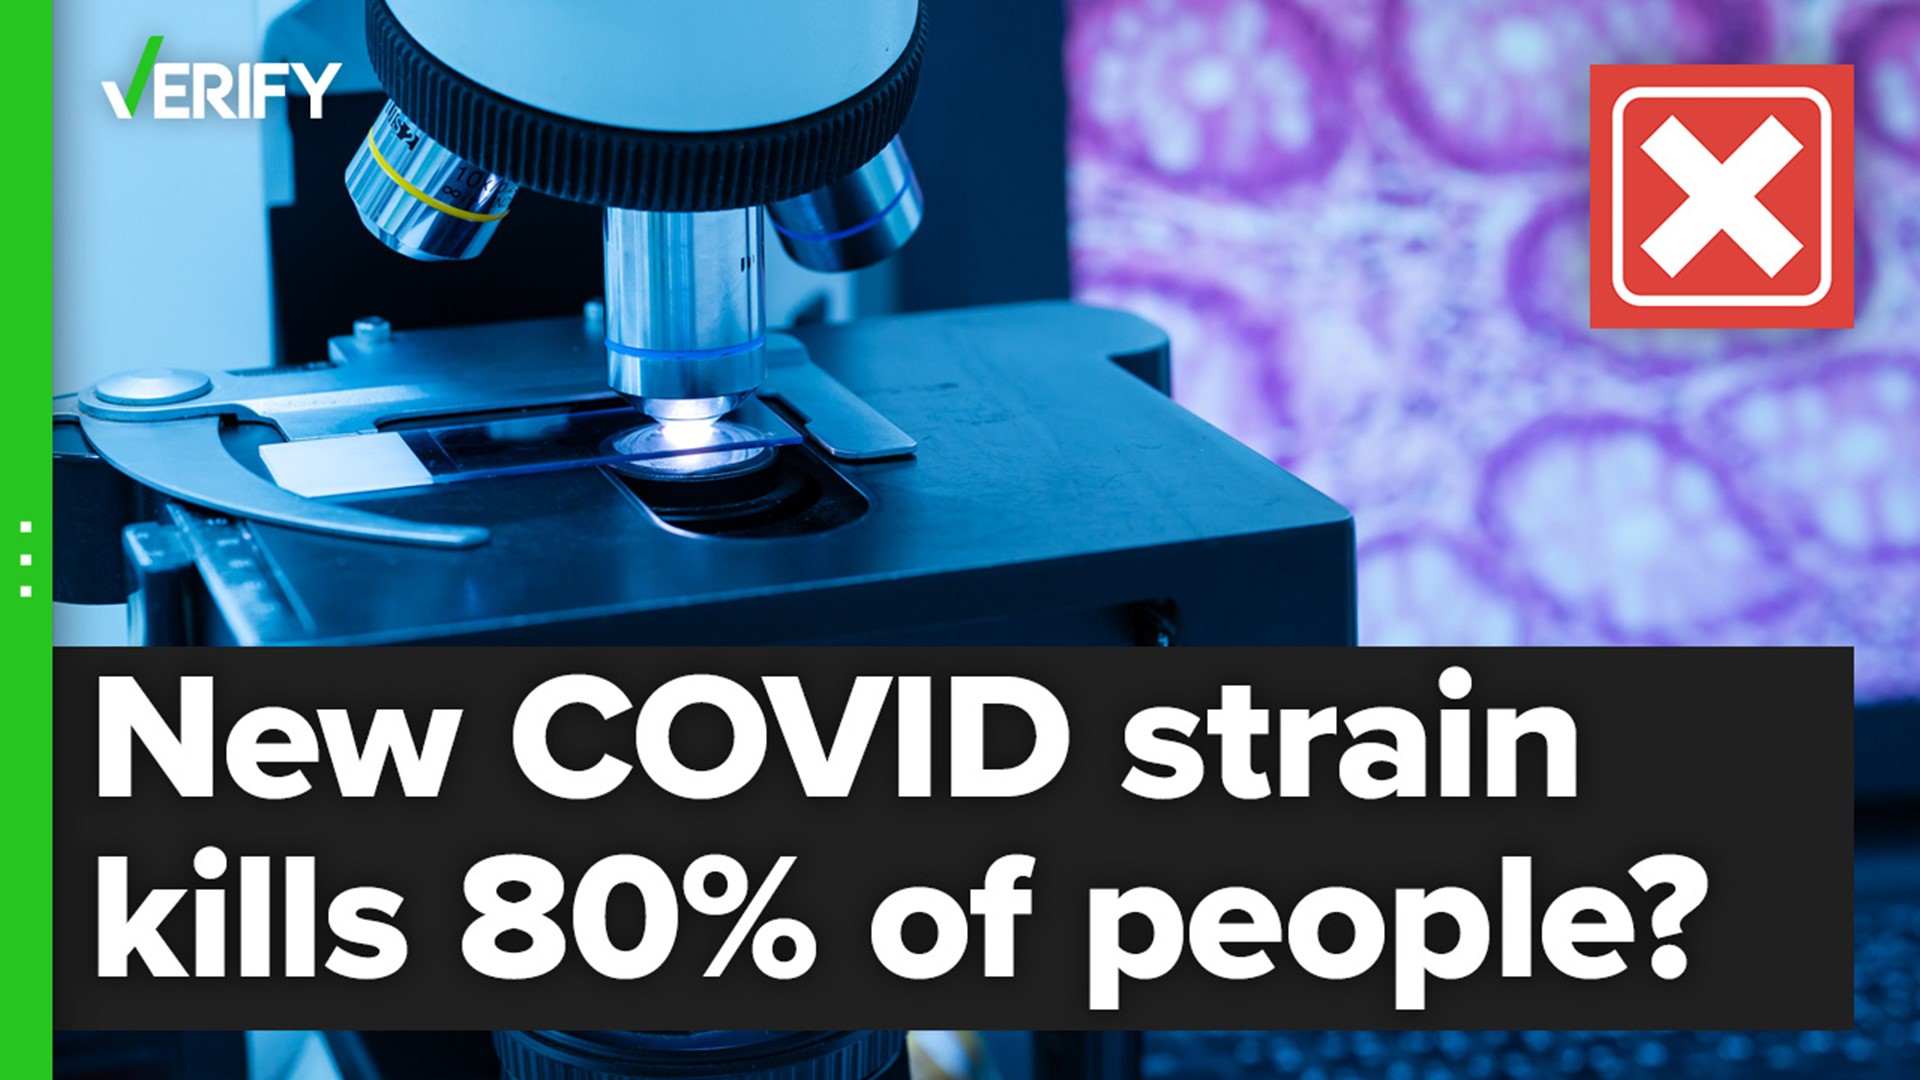 Boston University researchers studied the effects of a lab-made COVID strain on a type of mice that are highly susceptible to the virus.